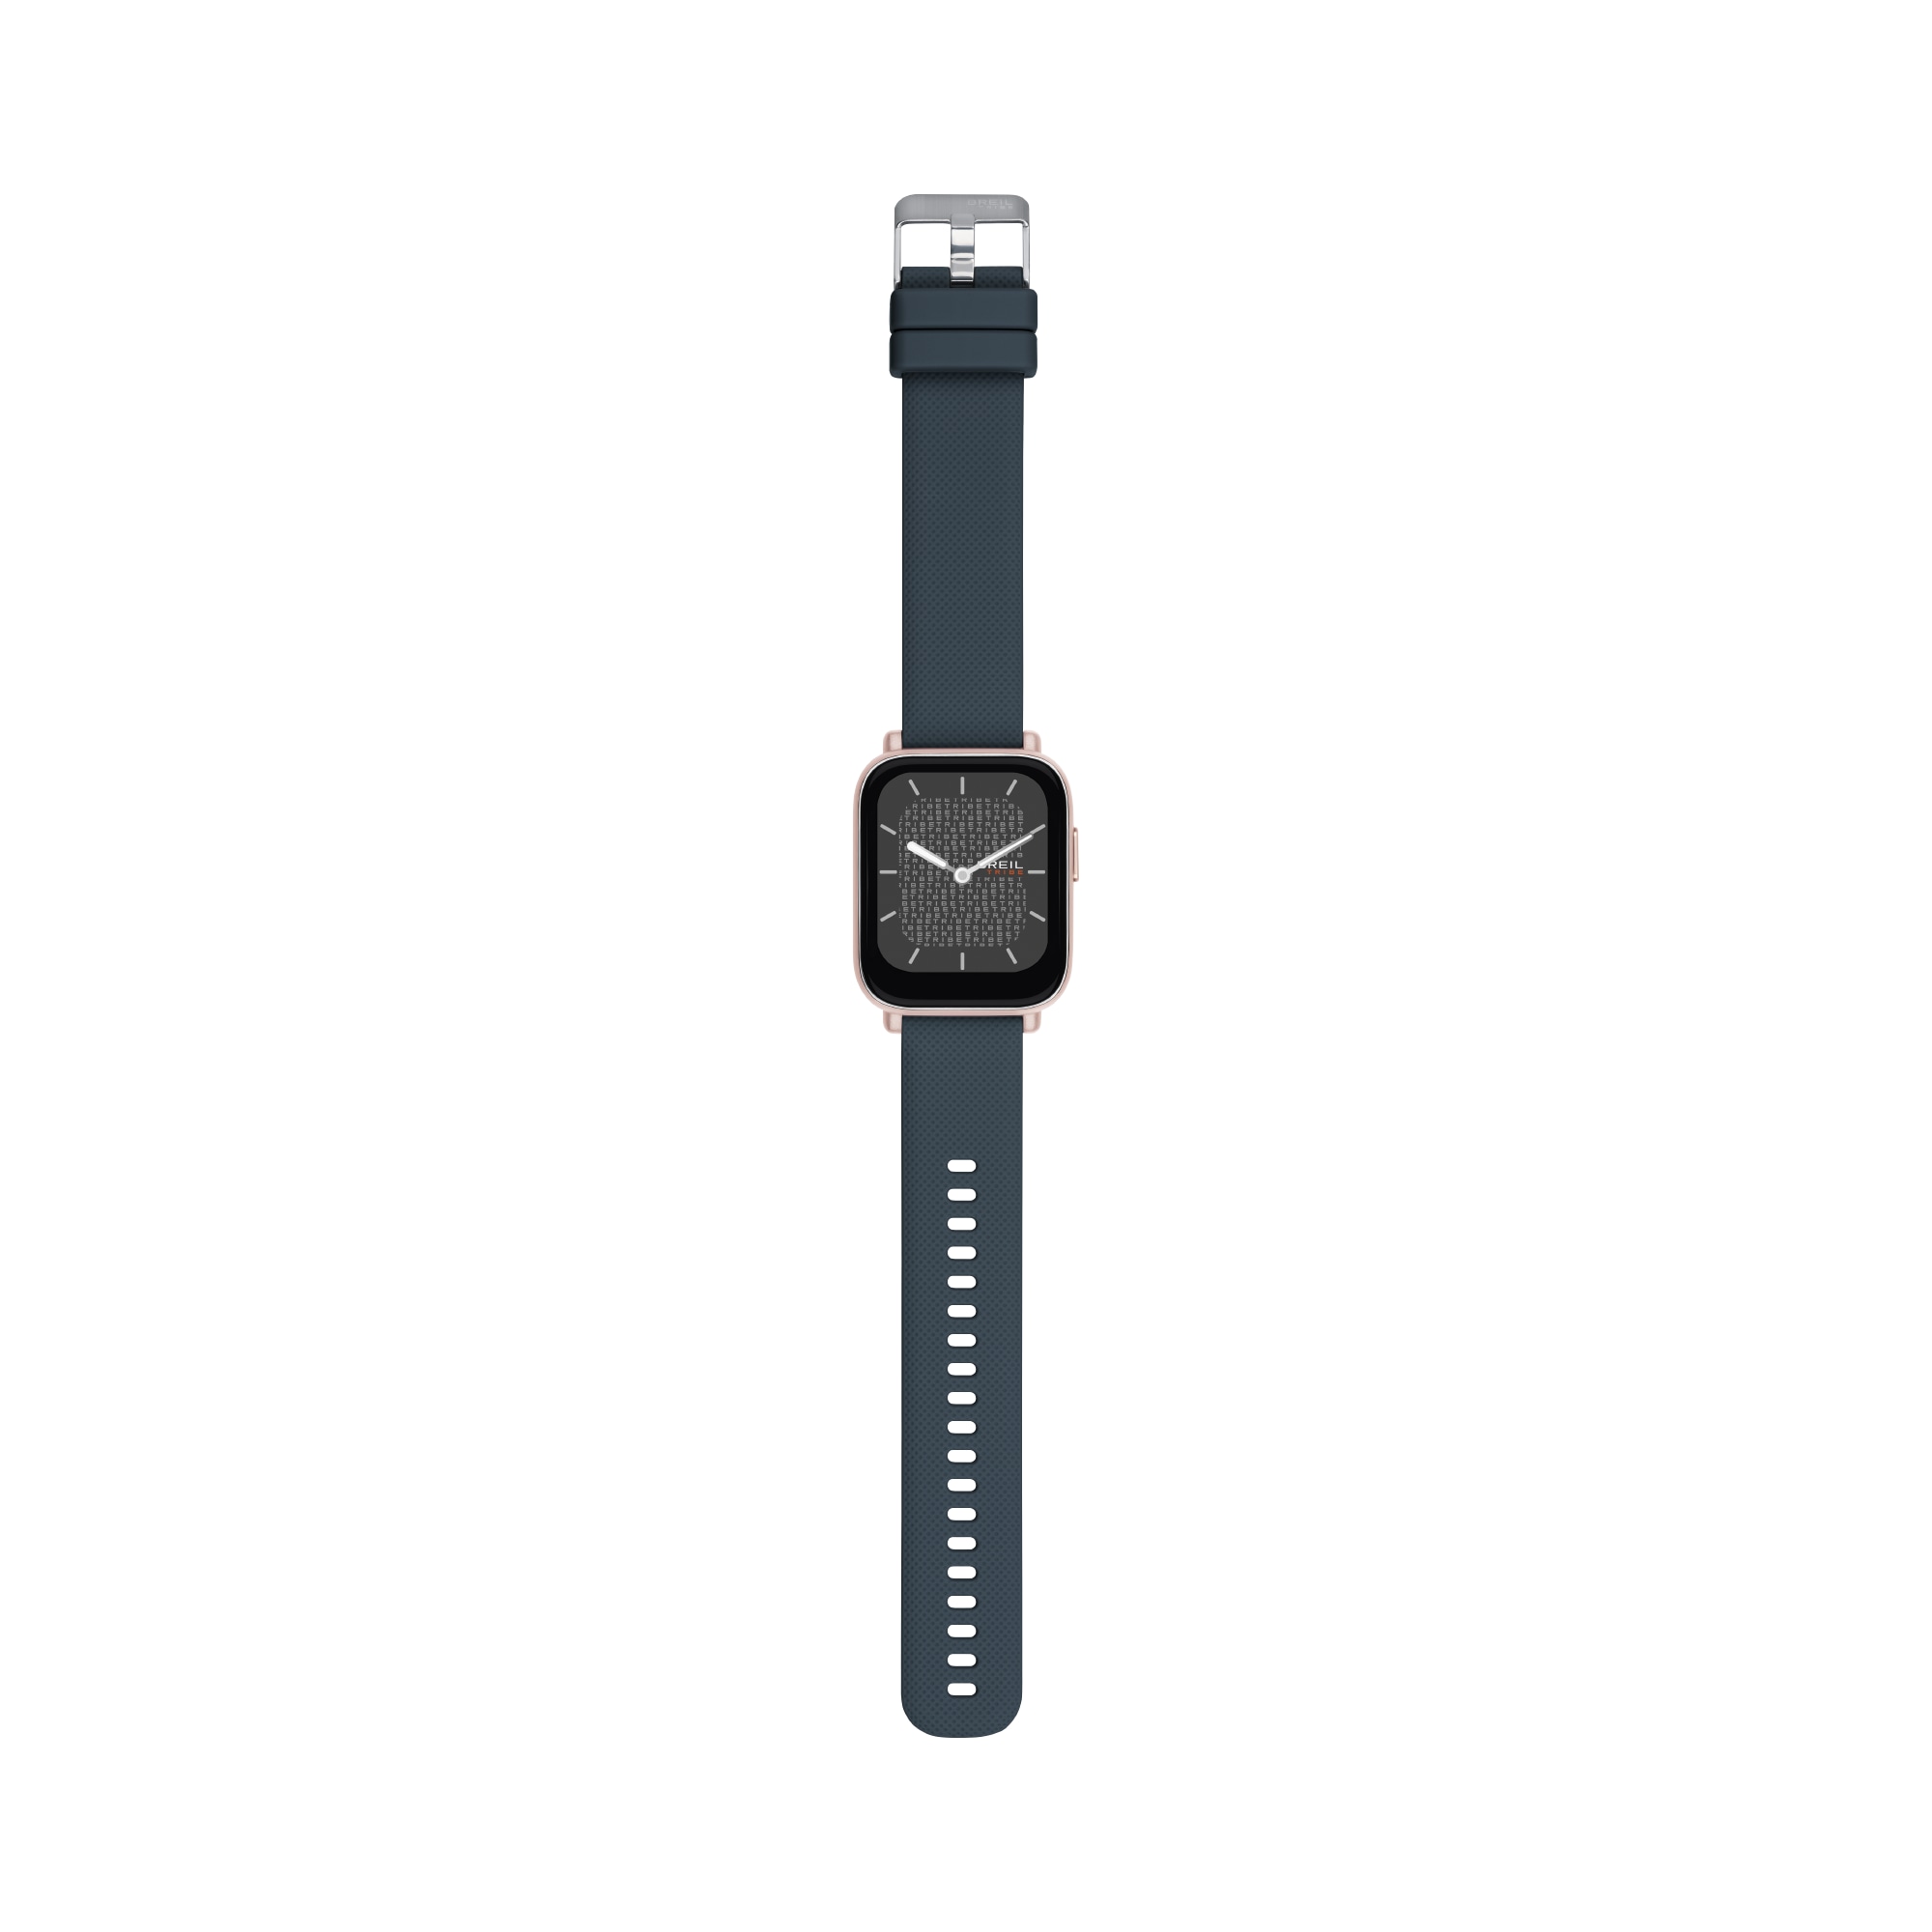 SBT-1 - SMARTWATCH WITH DOUBLE STRAP AND IP ROSE CASE - 8 - EW0603 | Breil